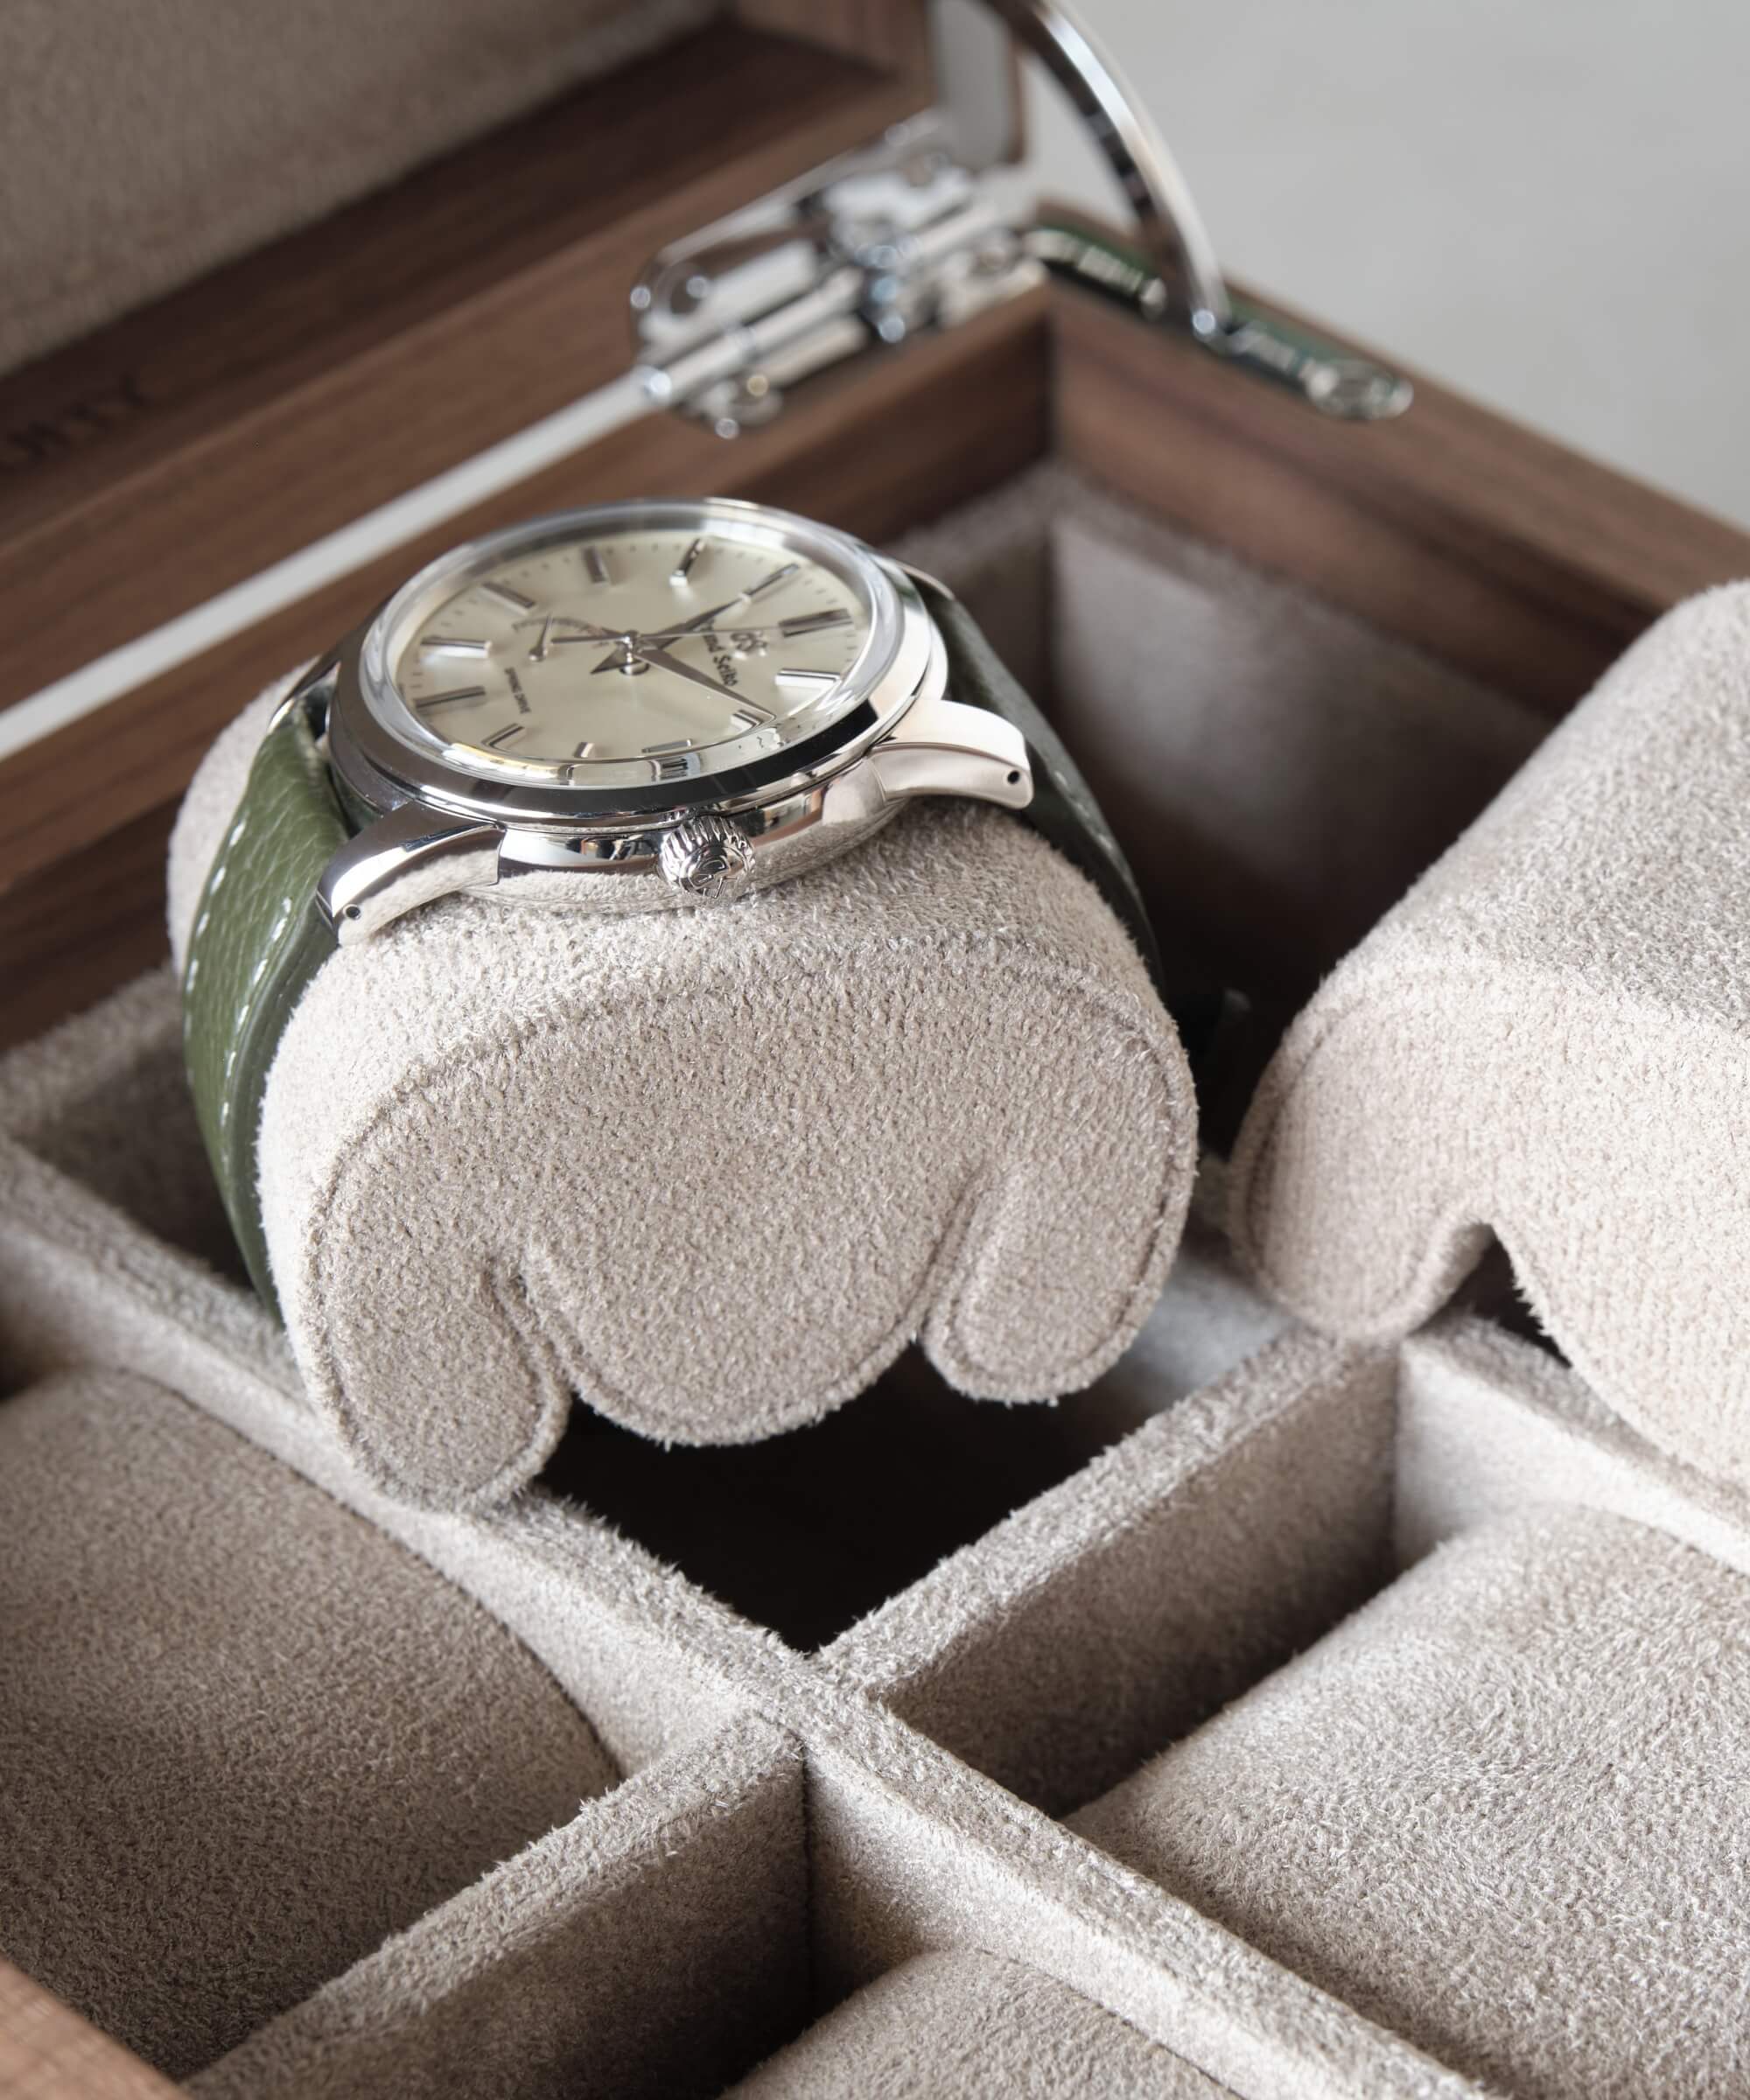 A TAWBURY watch from the Grove 6 Slot Watch Box with Solid Lid - Walnut collection is sitting in a wooden box filled with other timepieces.